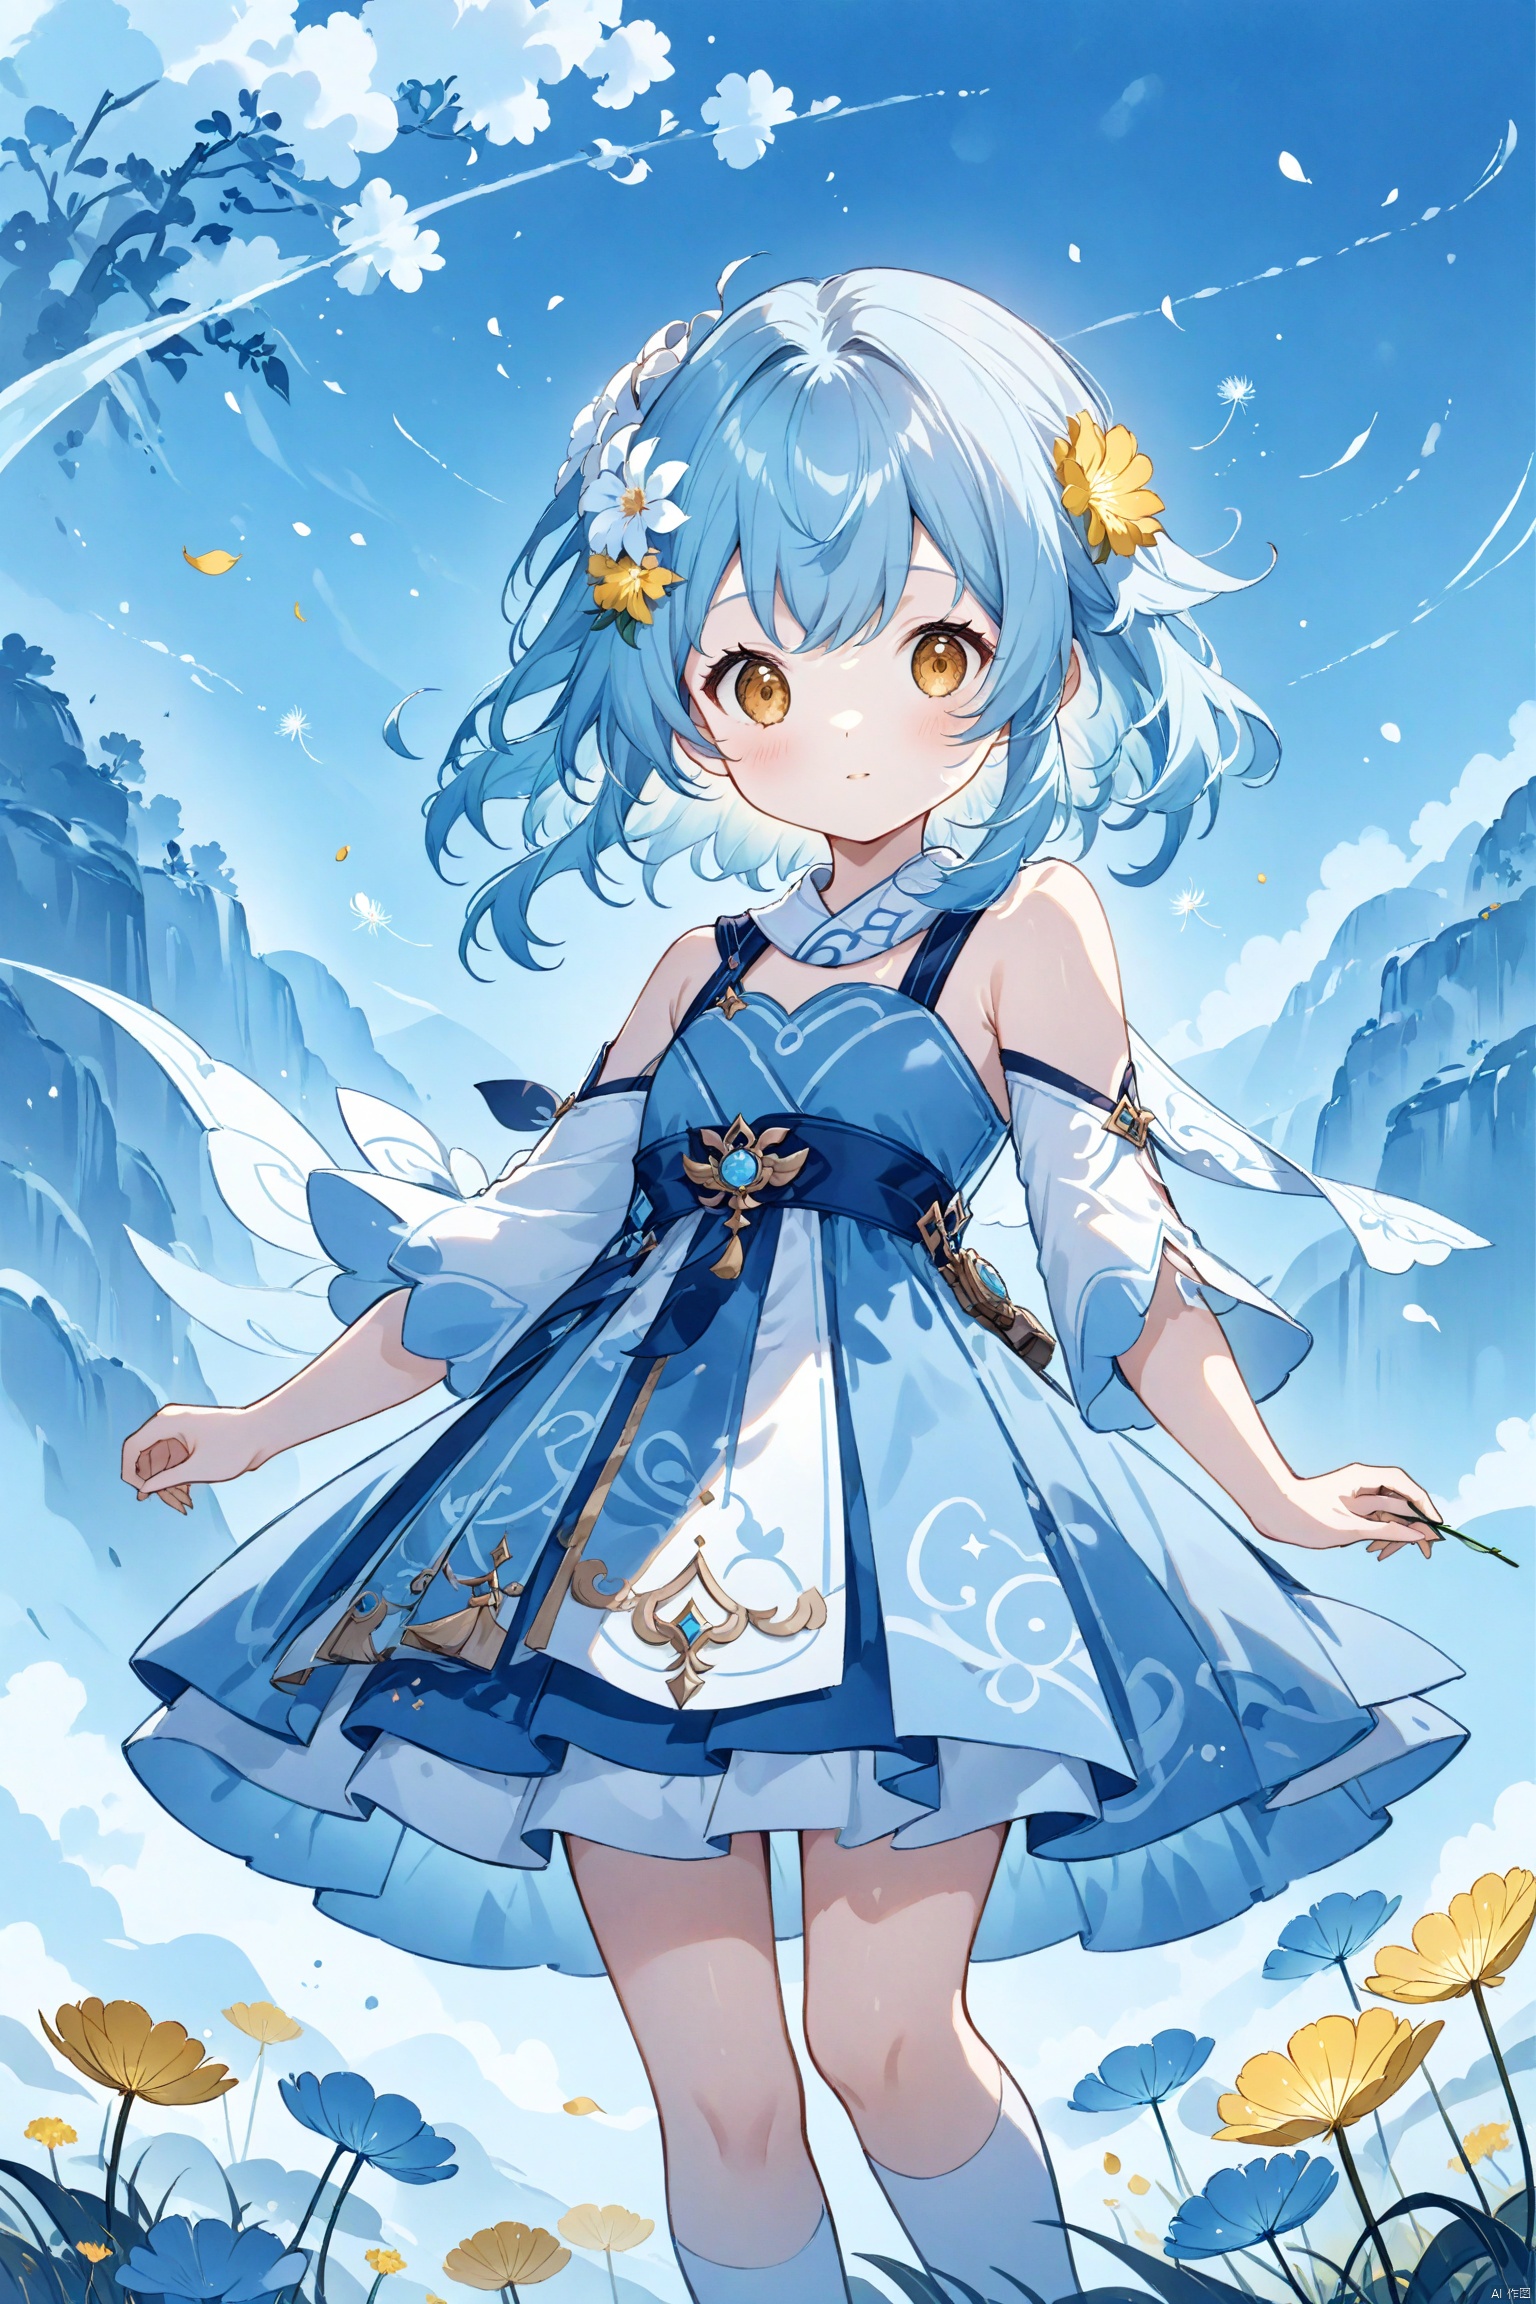  blue theme,Tie dyeing,A girl holding a dandelion flower, wearing a blue dress with white dots and yellow flowers on it, blowing away small petals in the style of light skyblue and pale aquamarine illustrations, a simple line drawing reminiscent of children's book illustrations and storybook art, with colorful cartooning and playful character design,lumine,genshin impact,